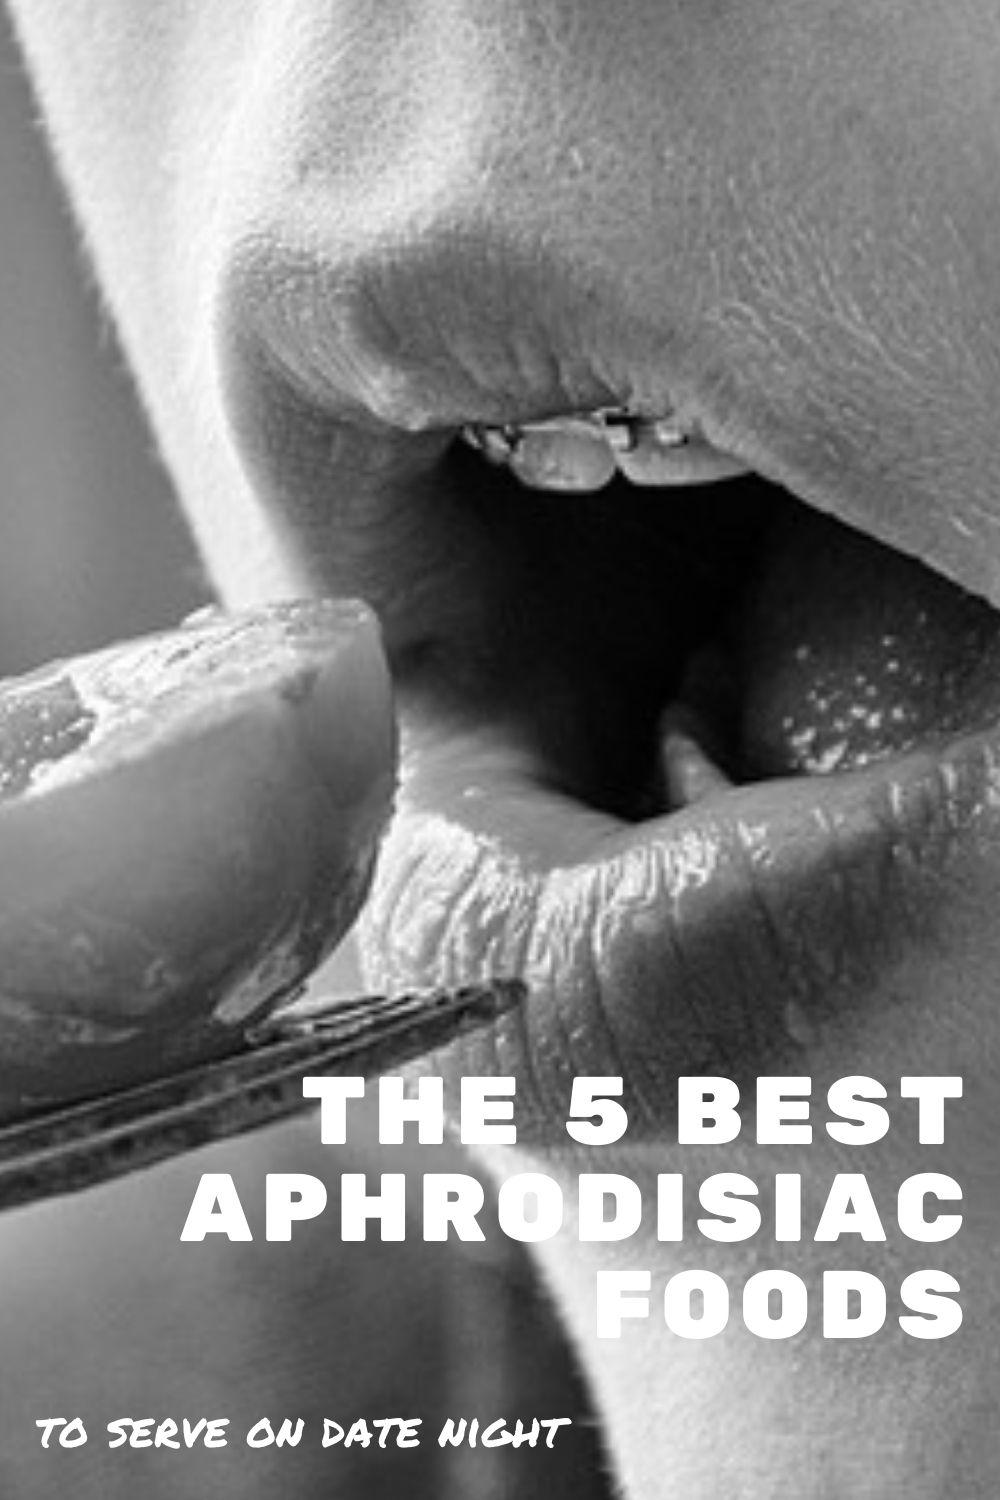 The 5 best aphrodisiac foods for date night graphic